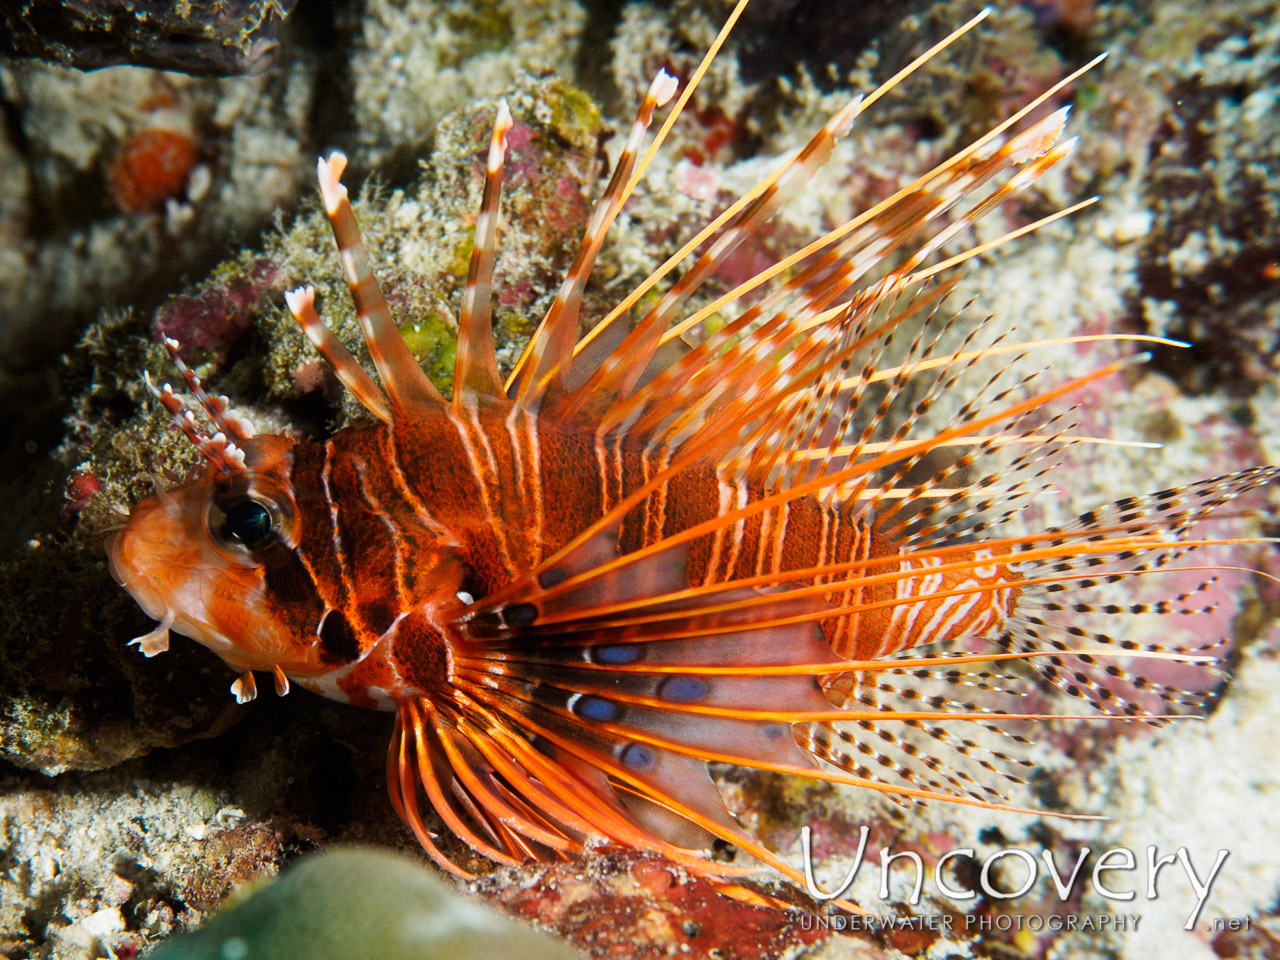 Devil Firefish (pterois Miles), photo taken in Maldives, Male Atoll, South Male Atoll, South Reef Out